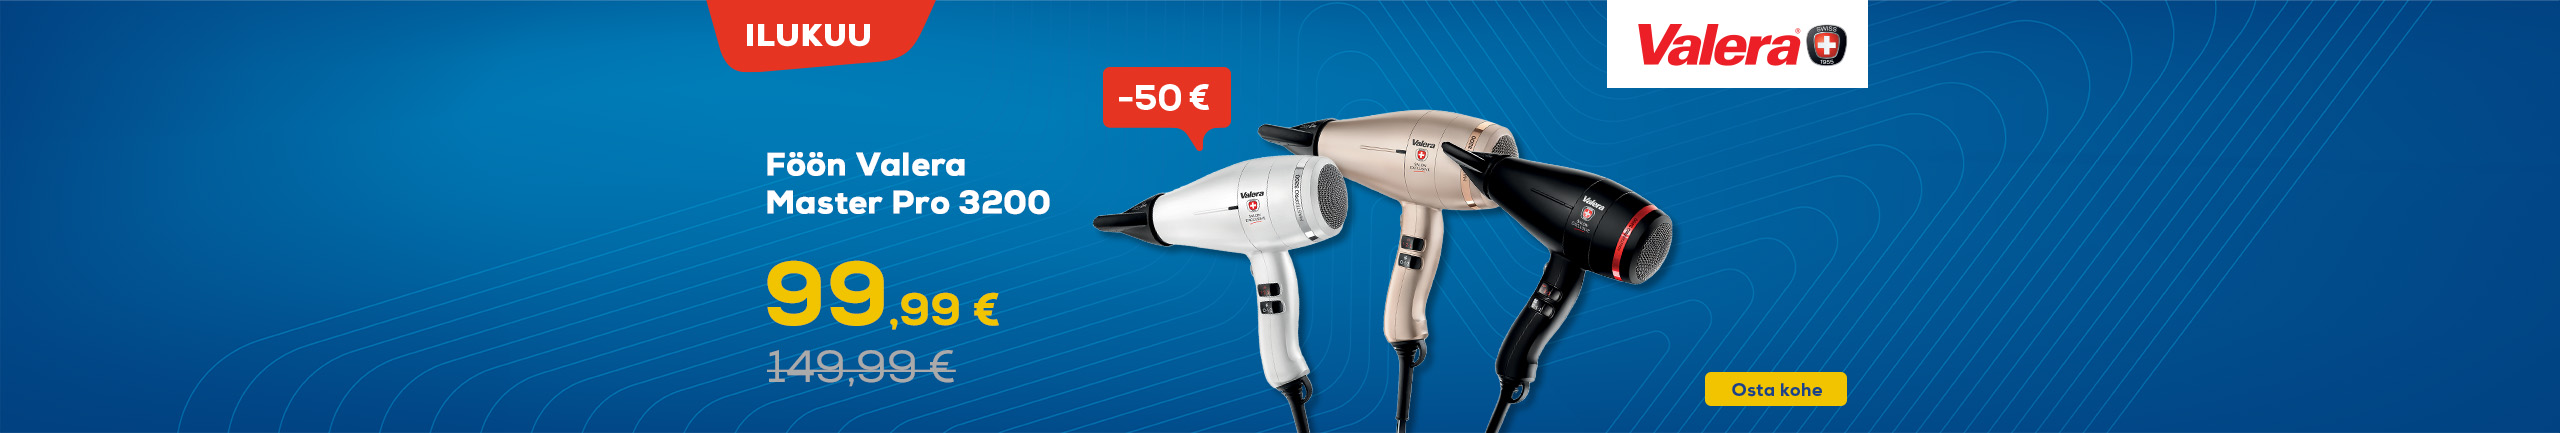 Beauty month offers Valera hair dryer  Master Pro 3200